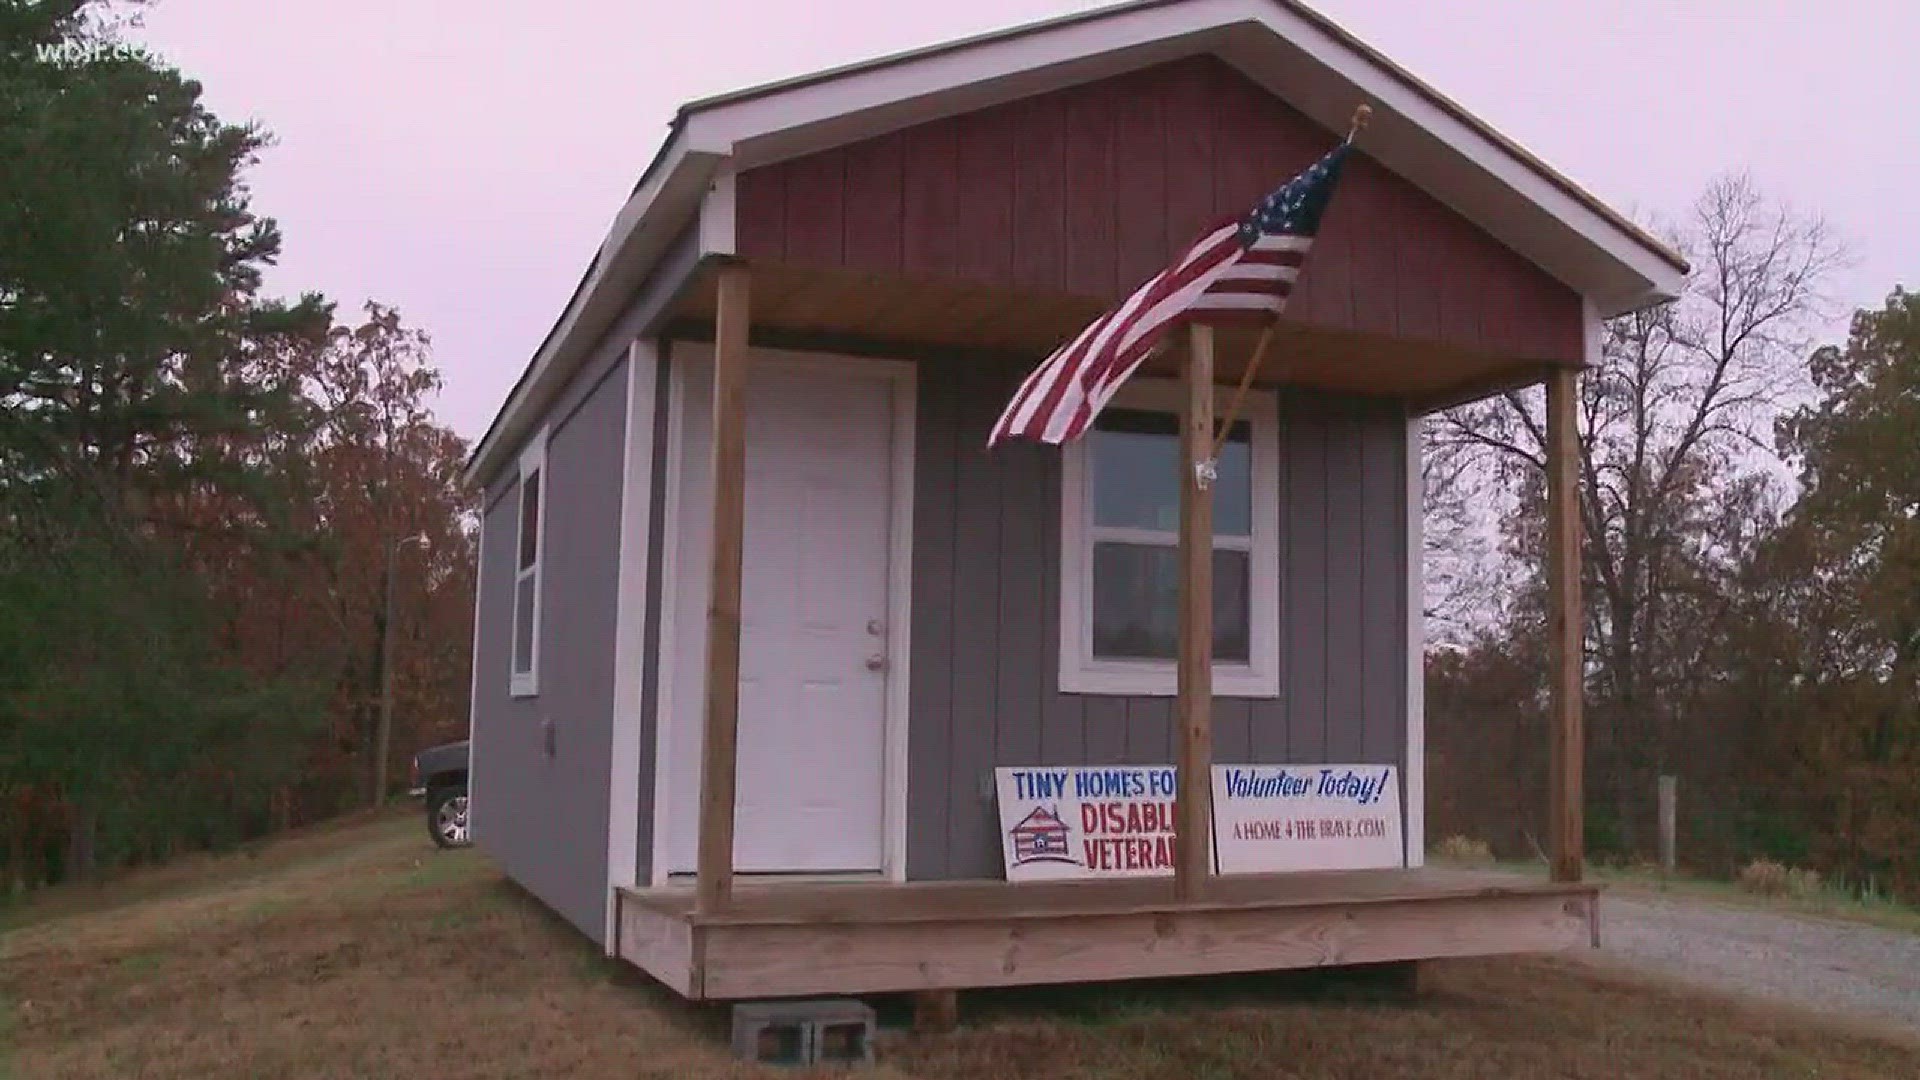 A man from Greenback is building tiny houses to give to veterans.
November 15, 2017 -4pm